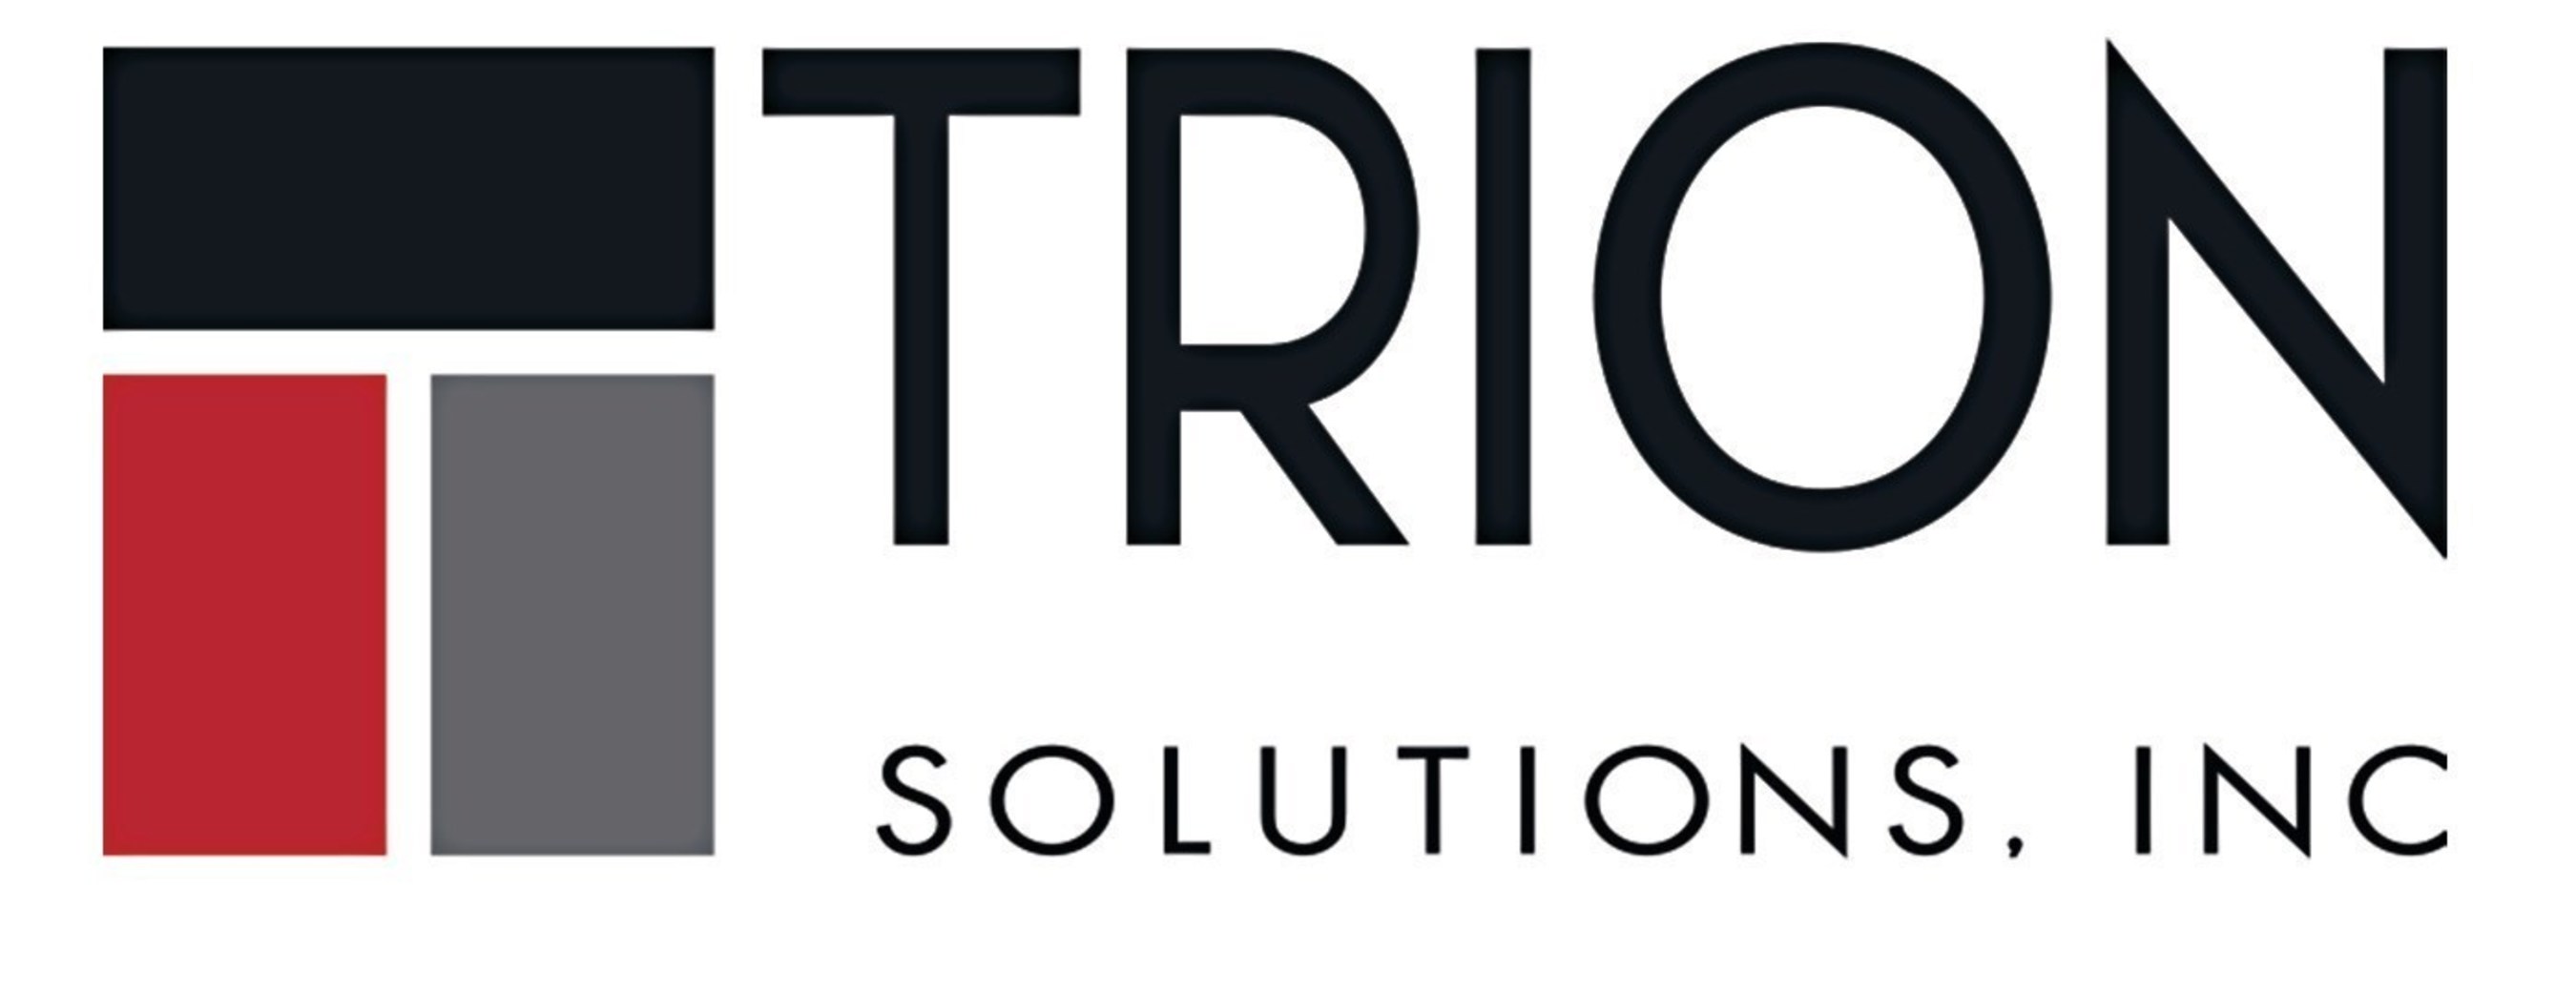 Trion Solutions Joins National Association of Professional Employer Organizations (PRNewsFoto/Trion Solutions, Inc.)